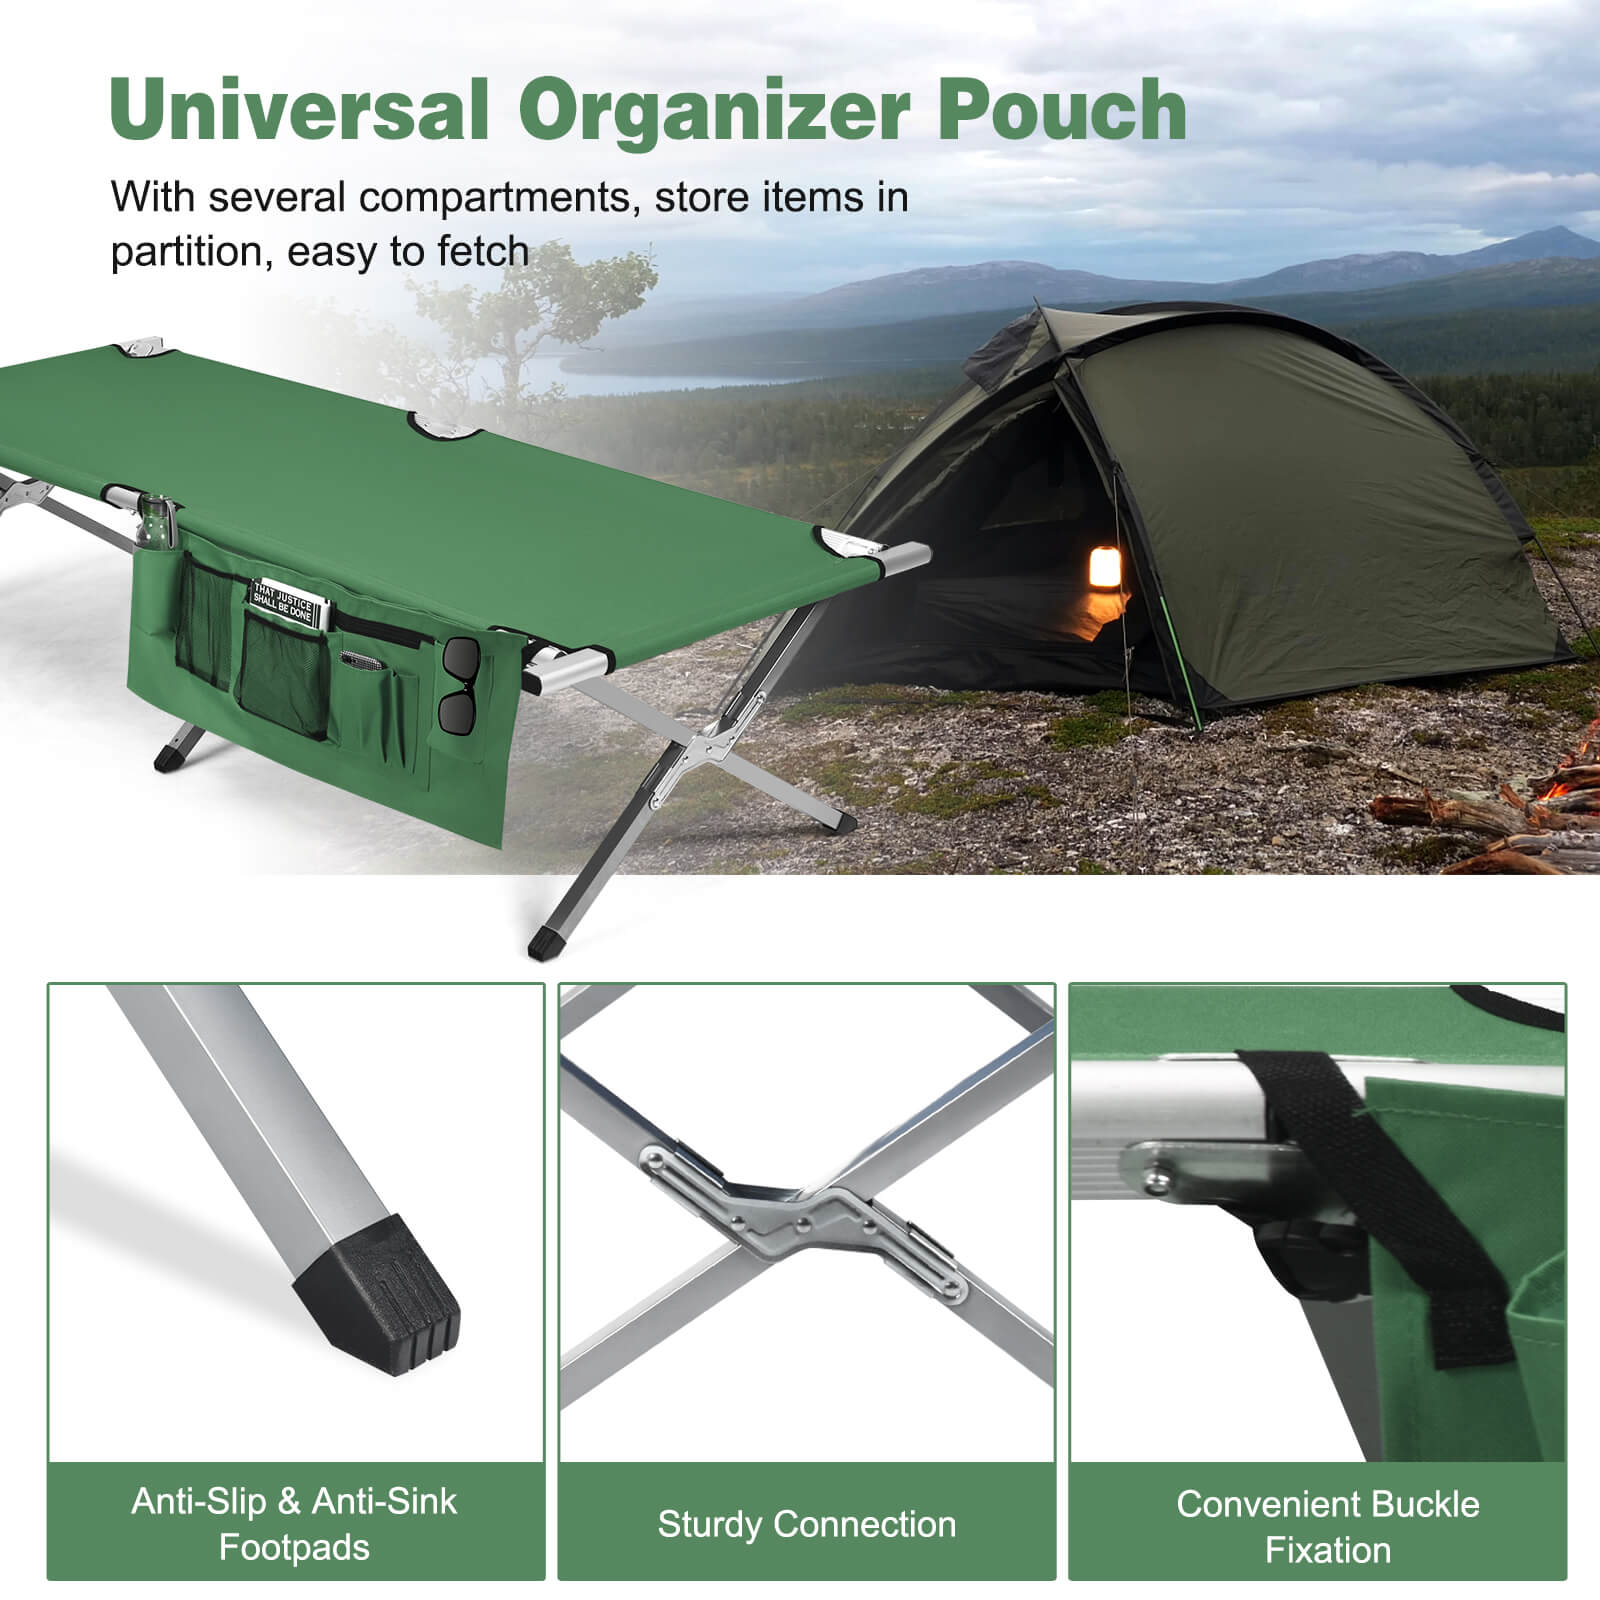 Folding_Camping_Bed_Outdoor_Sleeping_Cot_with_Carry_Bag_for_Beach_Green-11.jpg